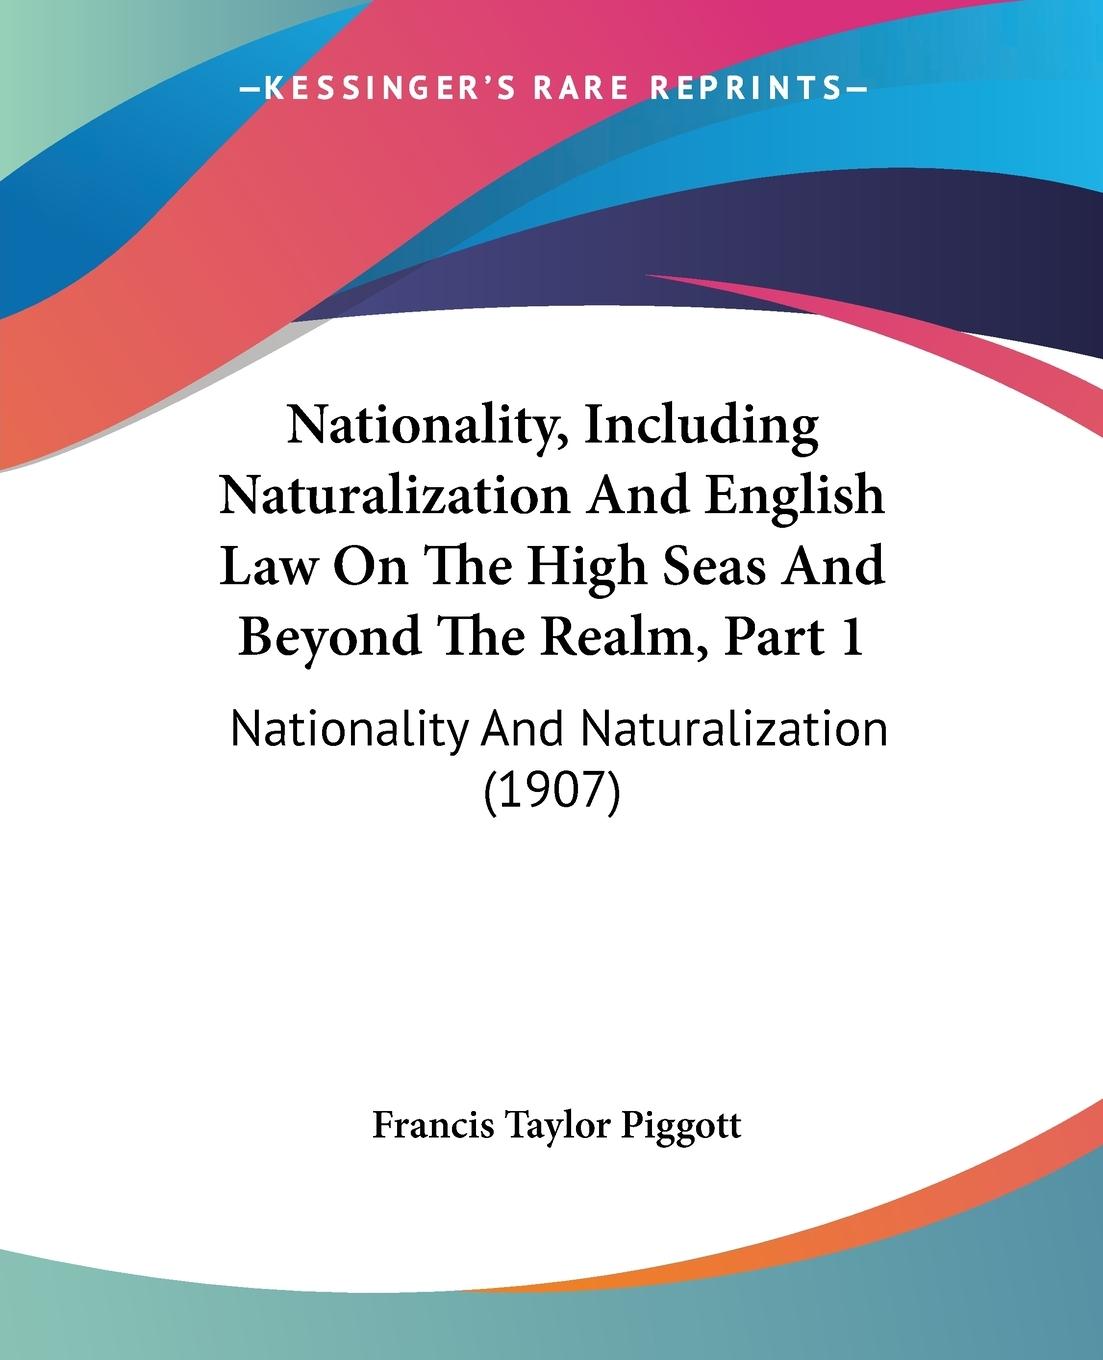 Nationality, Including Naturalization And English Law On The High Seas And Beyond The Realm, Part 1 - Piggott, Francis Taylor